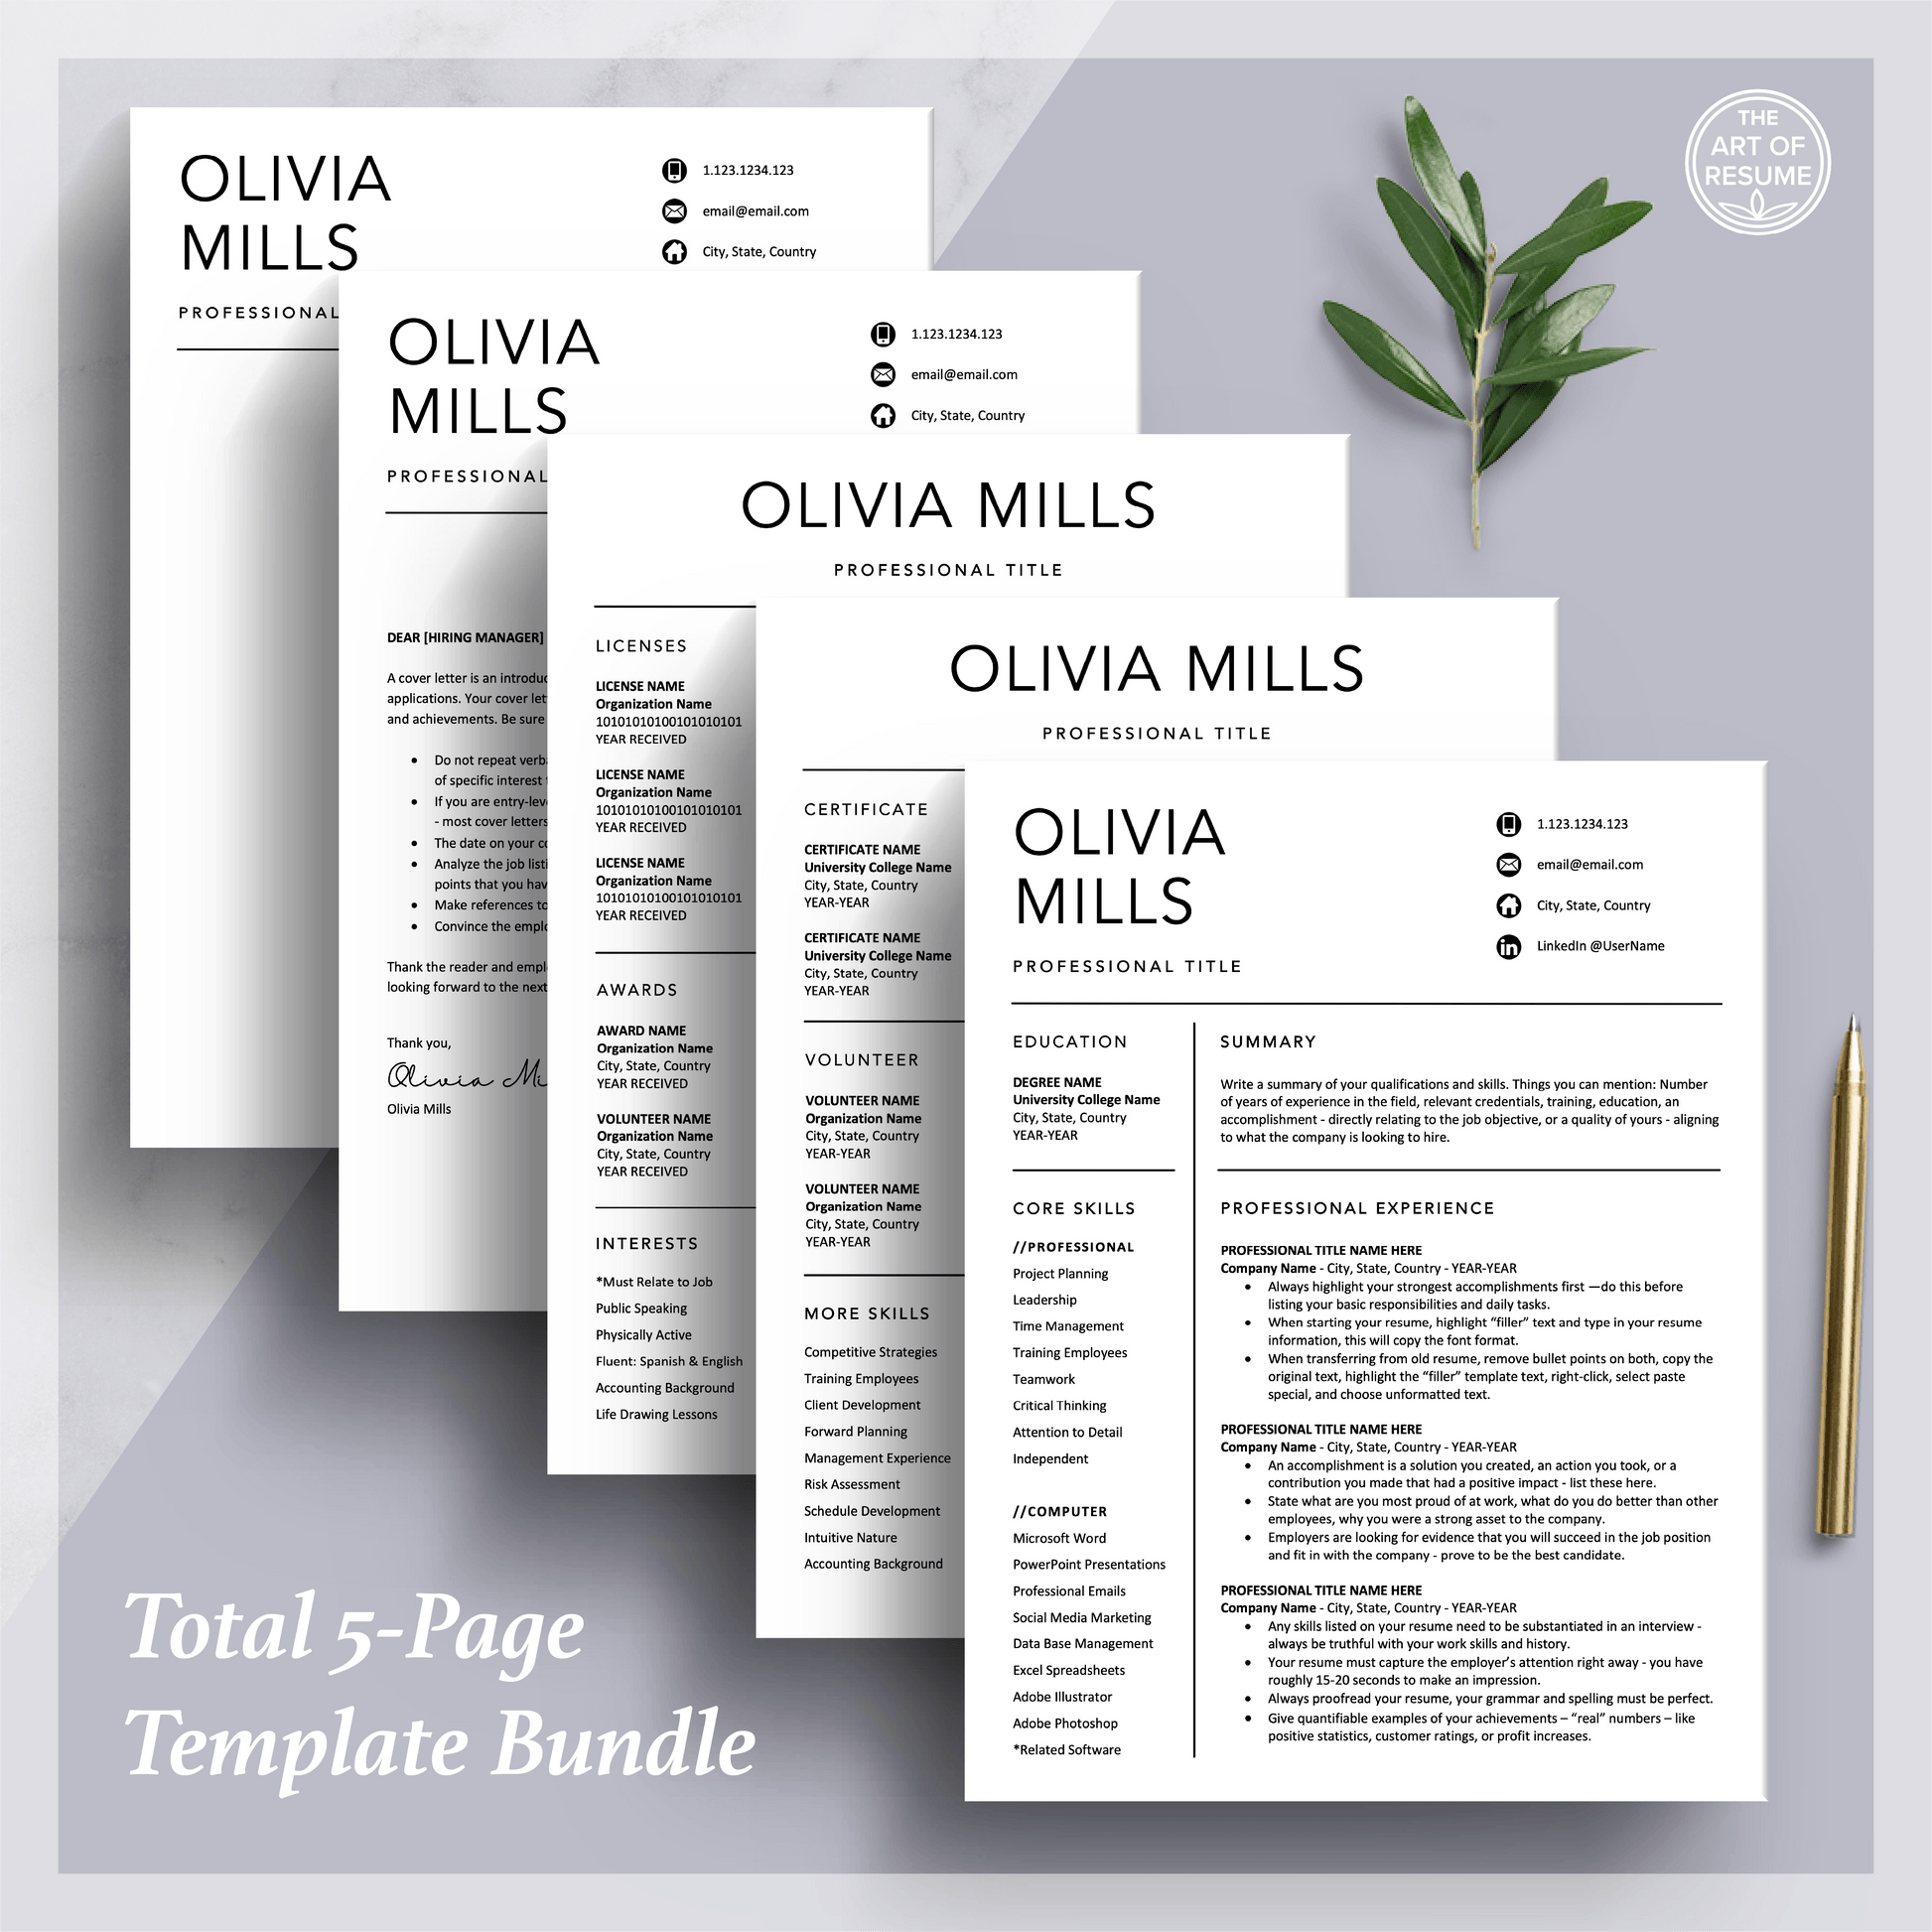 Simple Resume | Modern Template [Fast & Easy] - The Art of Resume